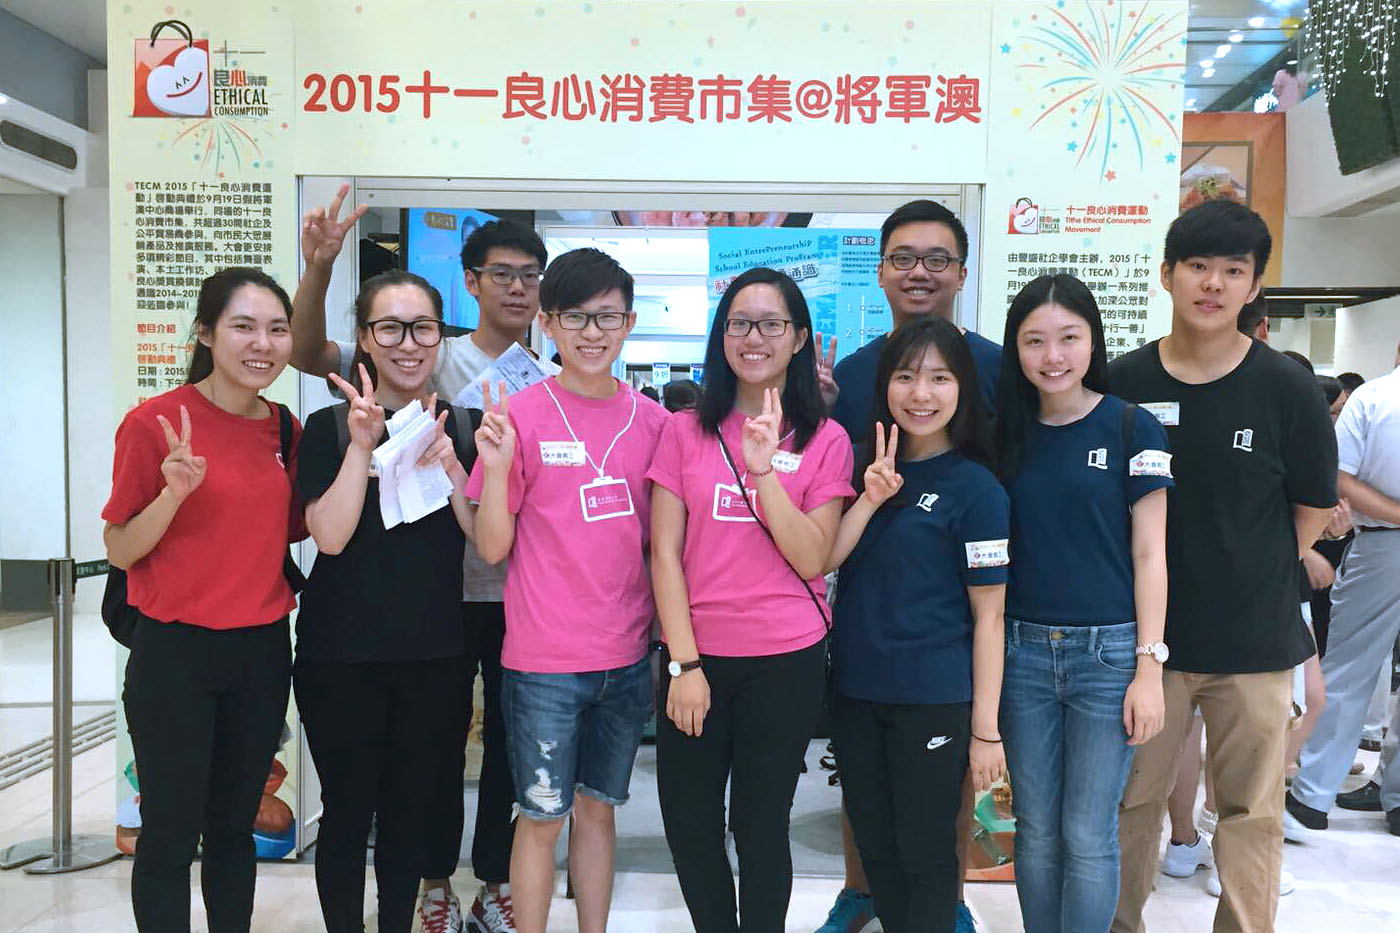 CIE students volunteer in “Tithe Ethical Consumption Movement” Bazaar 